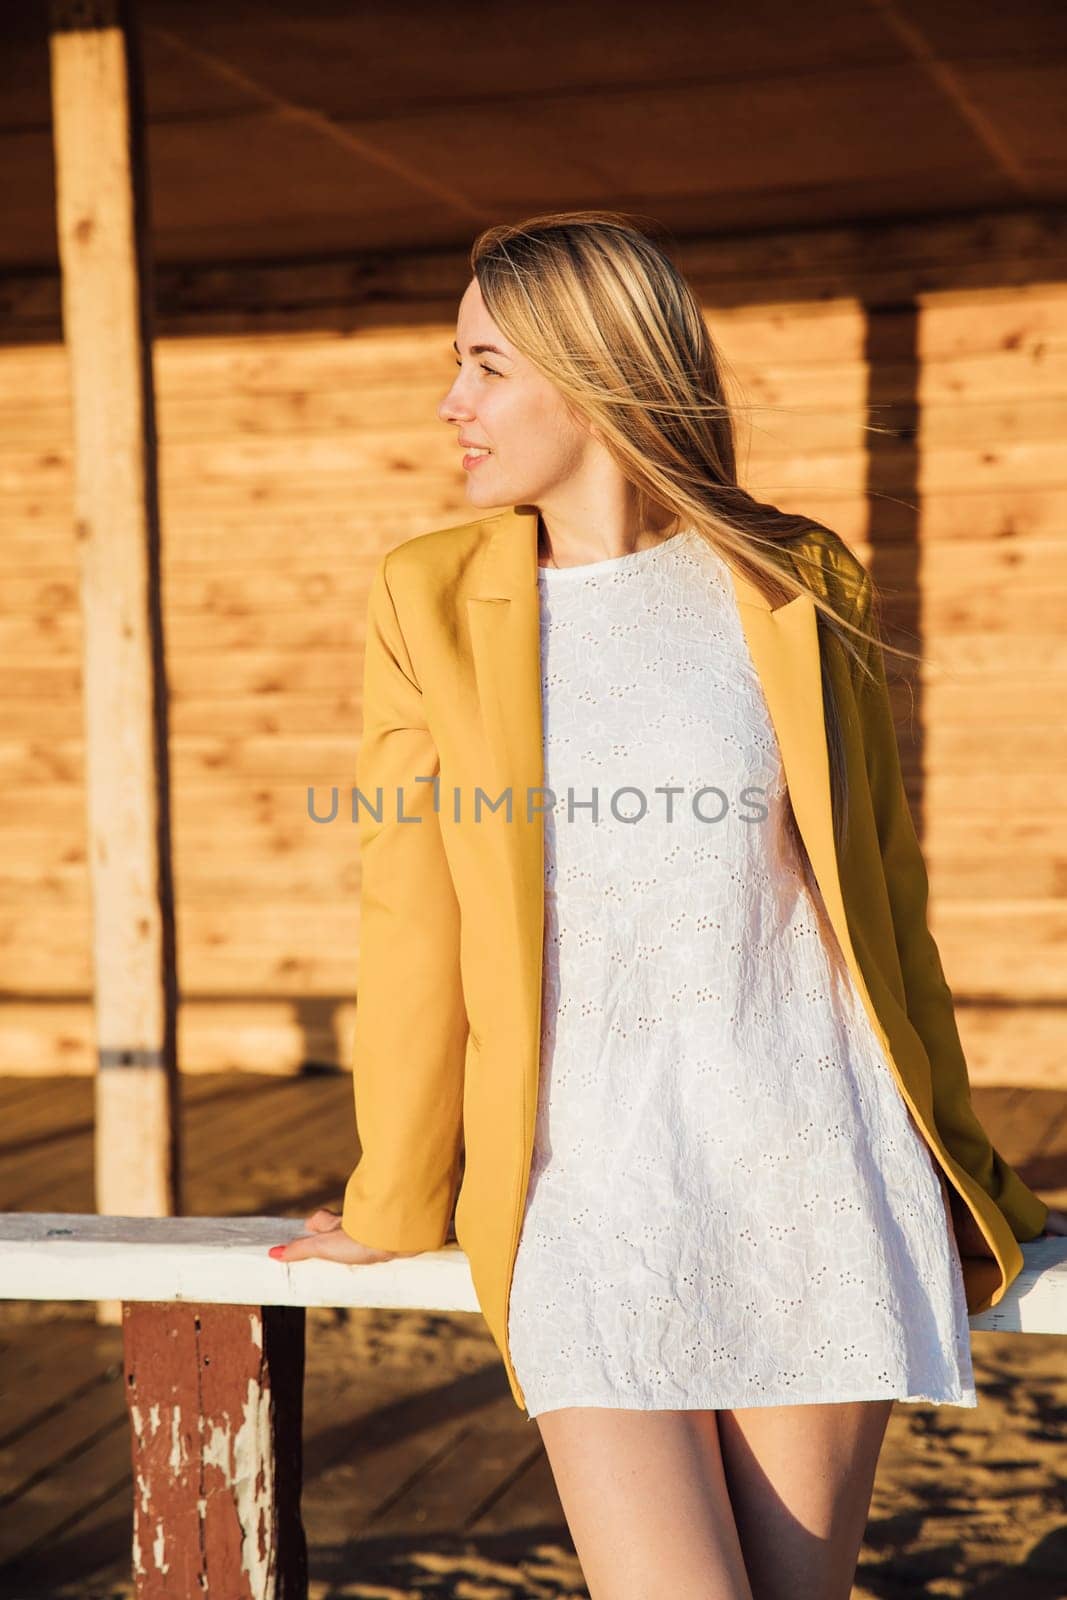 blonde woman in a light summer dress and yellow jacket by Simakov